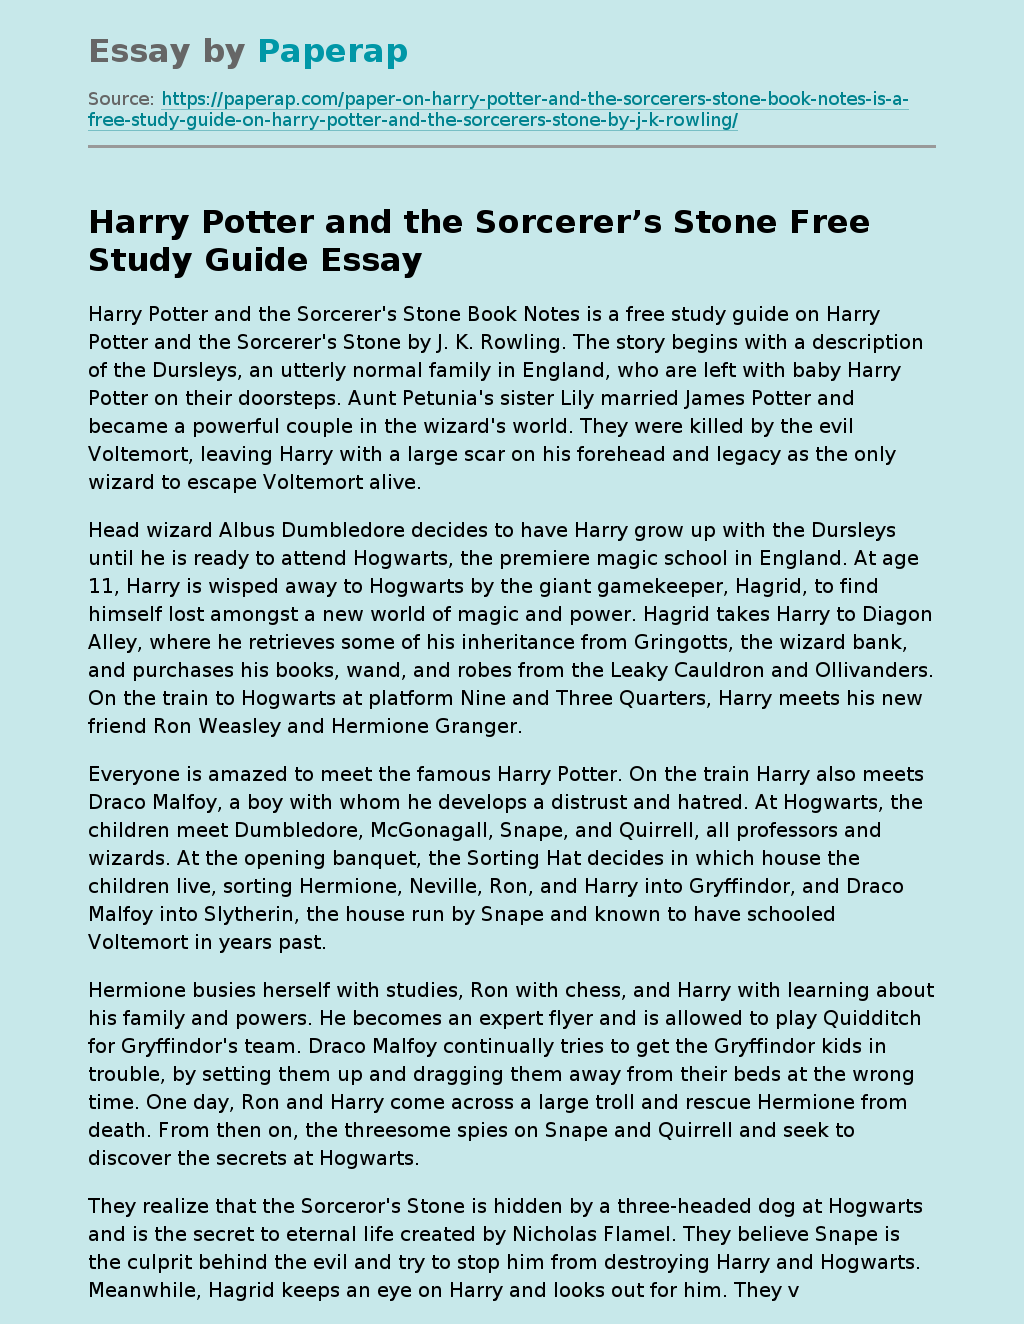 Harry Potter and the Sorcerer’s Stone Free Study Guide